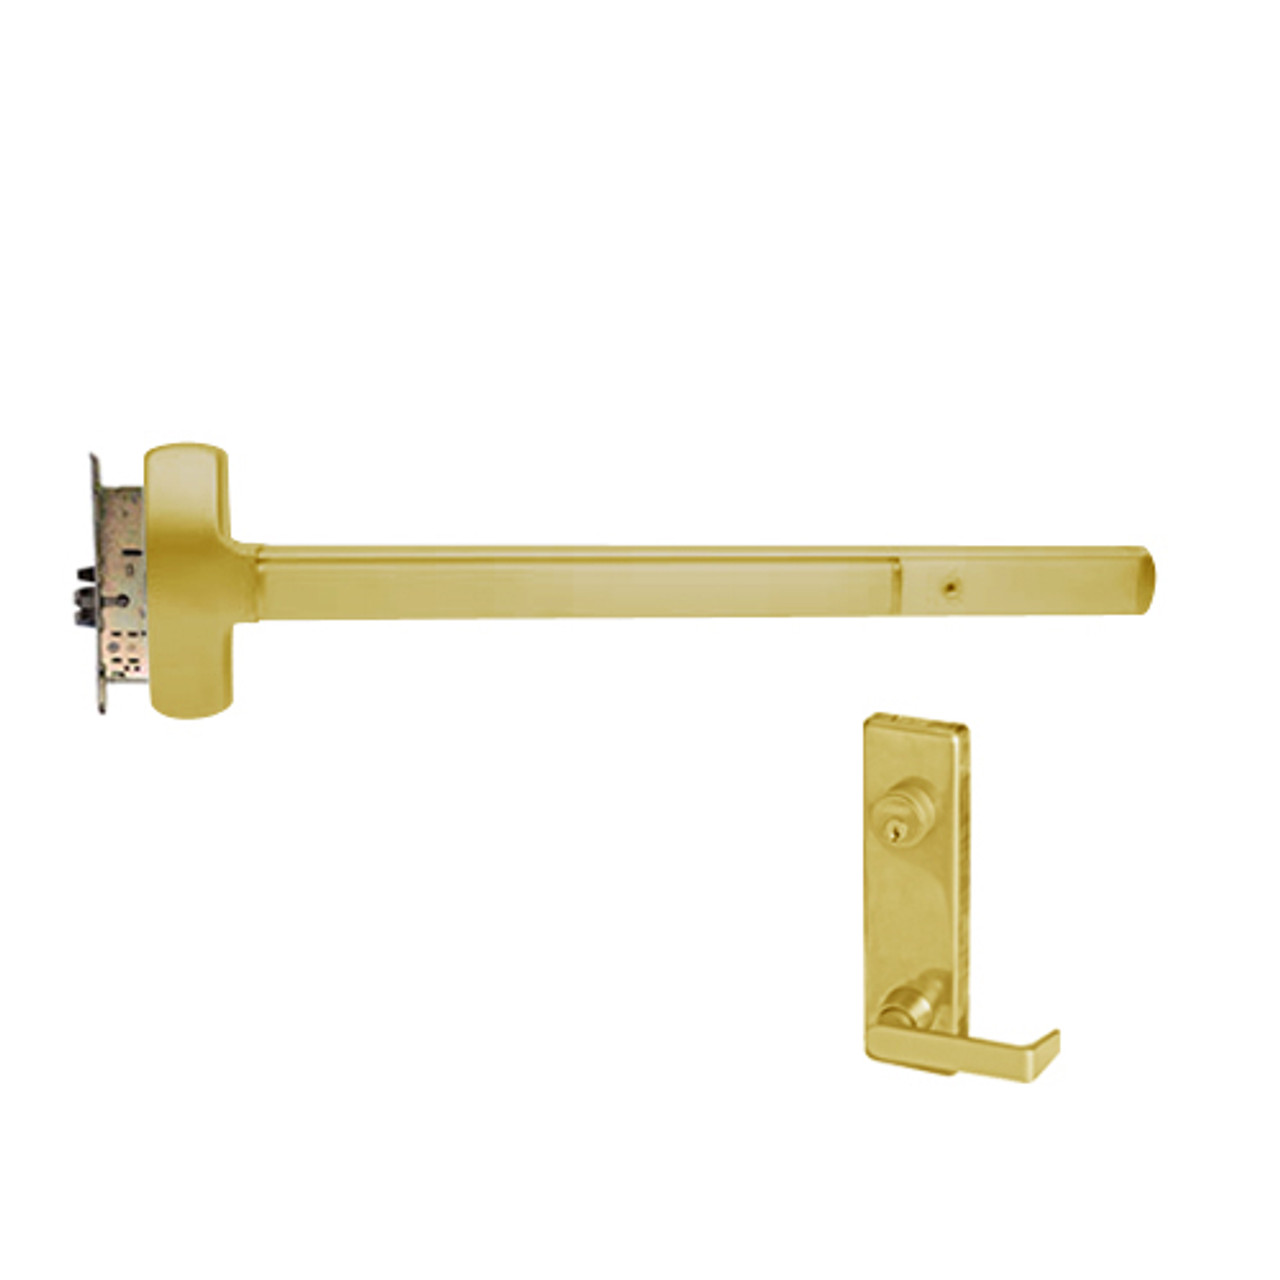 25-M-L-DANE-US3-4-LHR Falcon Exit Device in Polished Brass